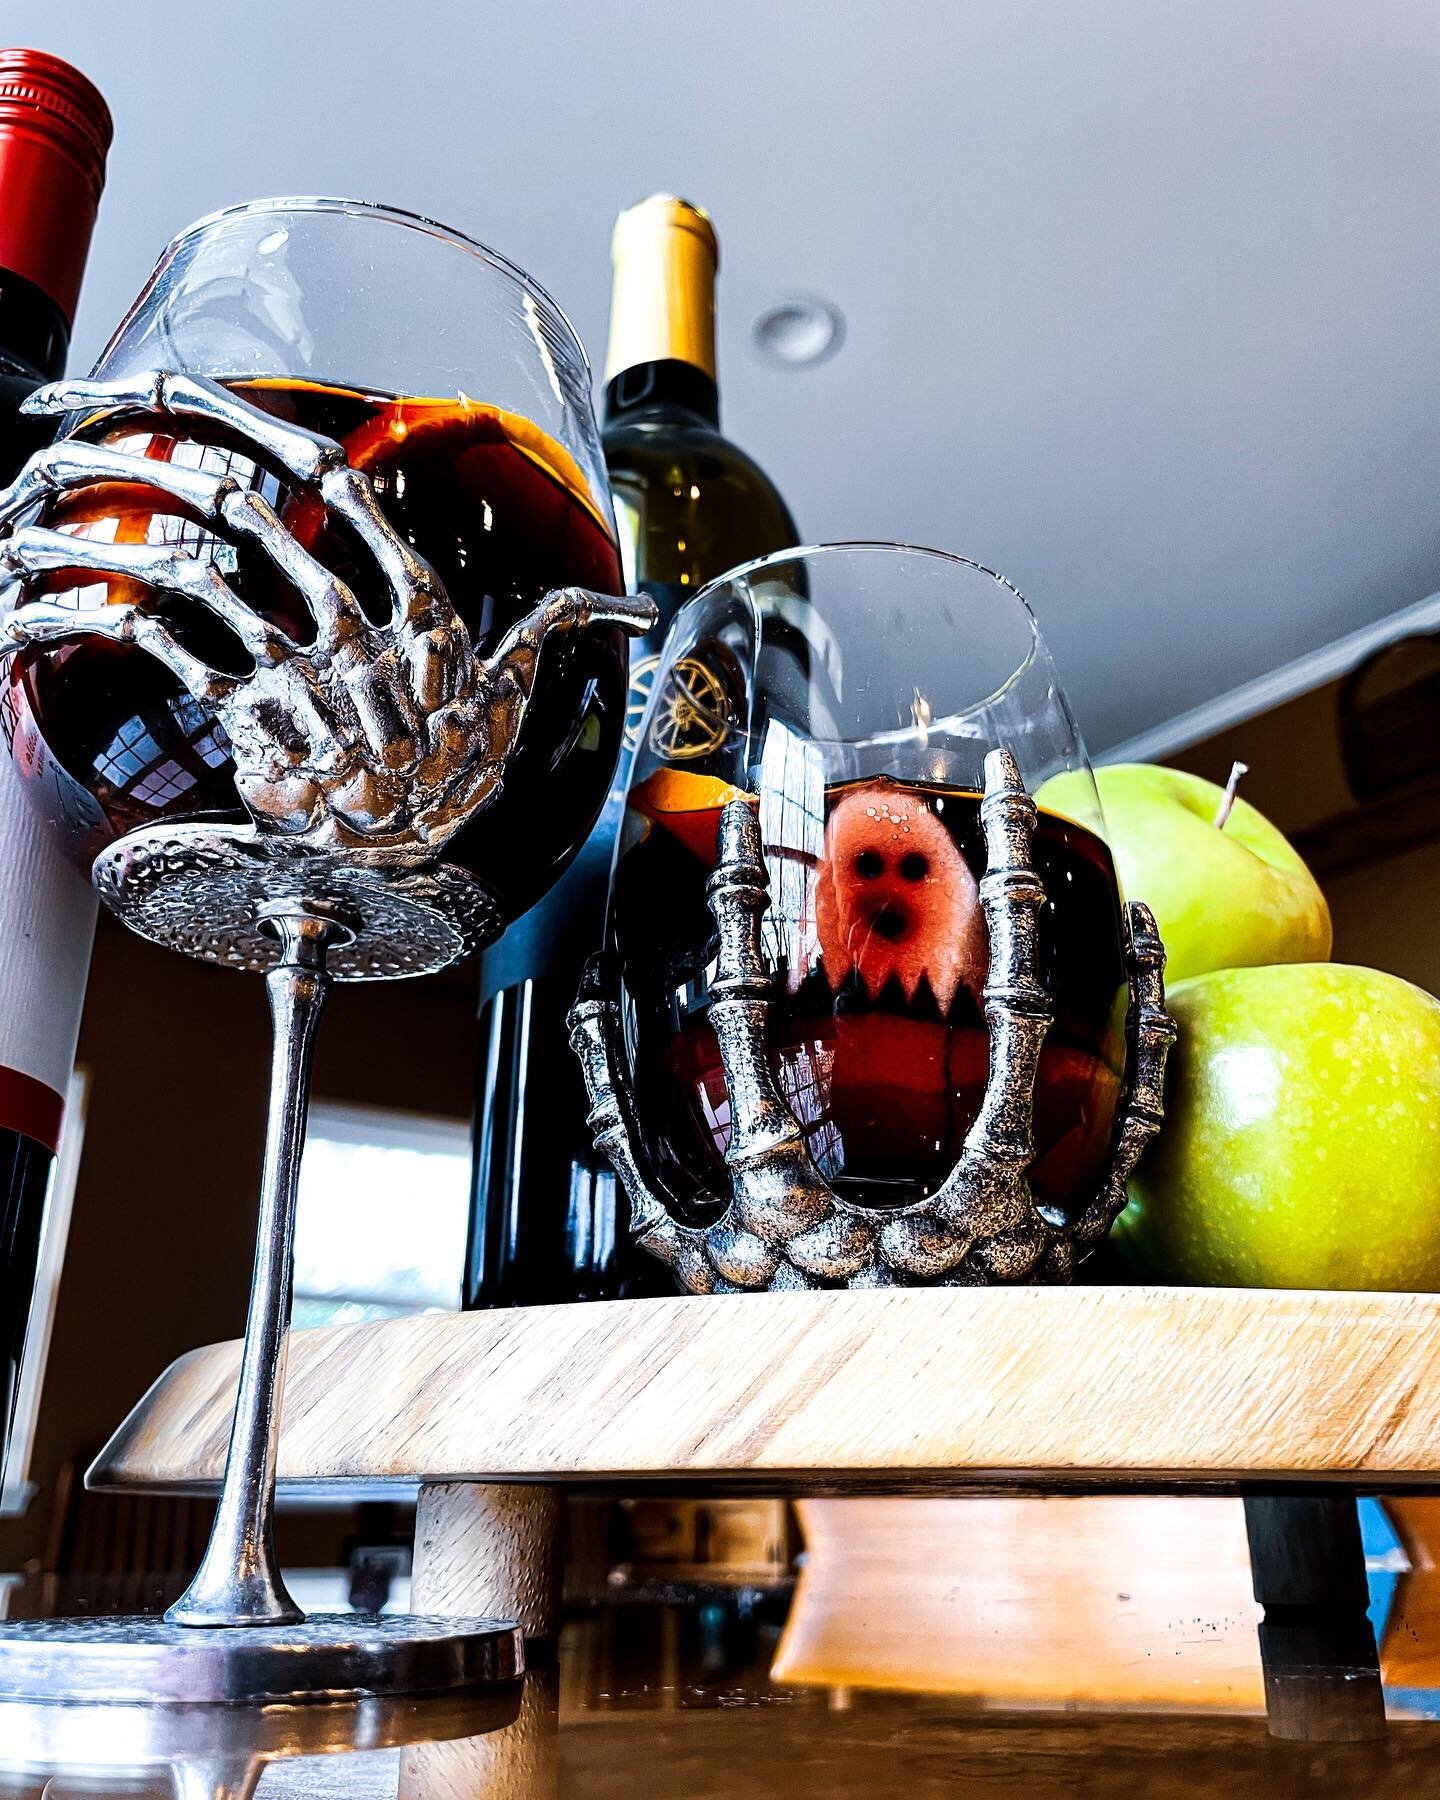 Happy Halloween 👻 
.
Pro tip: has you wine been open too long? Prolong its life by making it a Spooky Sangria! Just cut ghosts out of apples and add complementary flavors 🍏